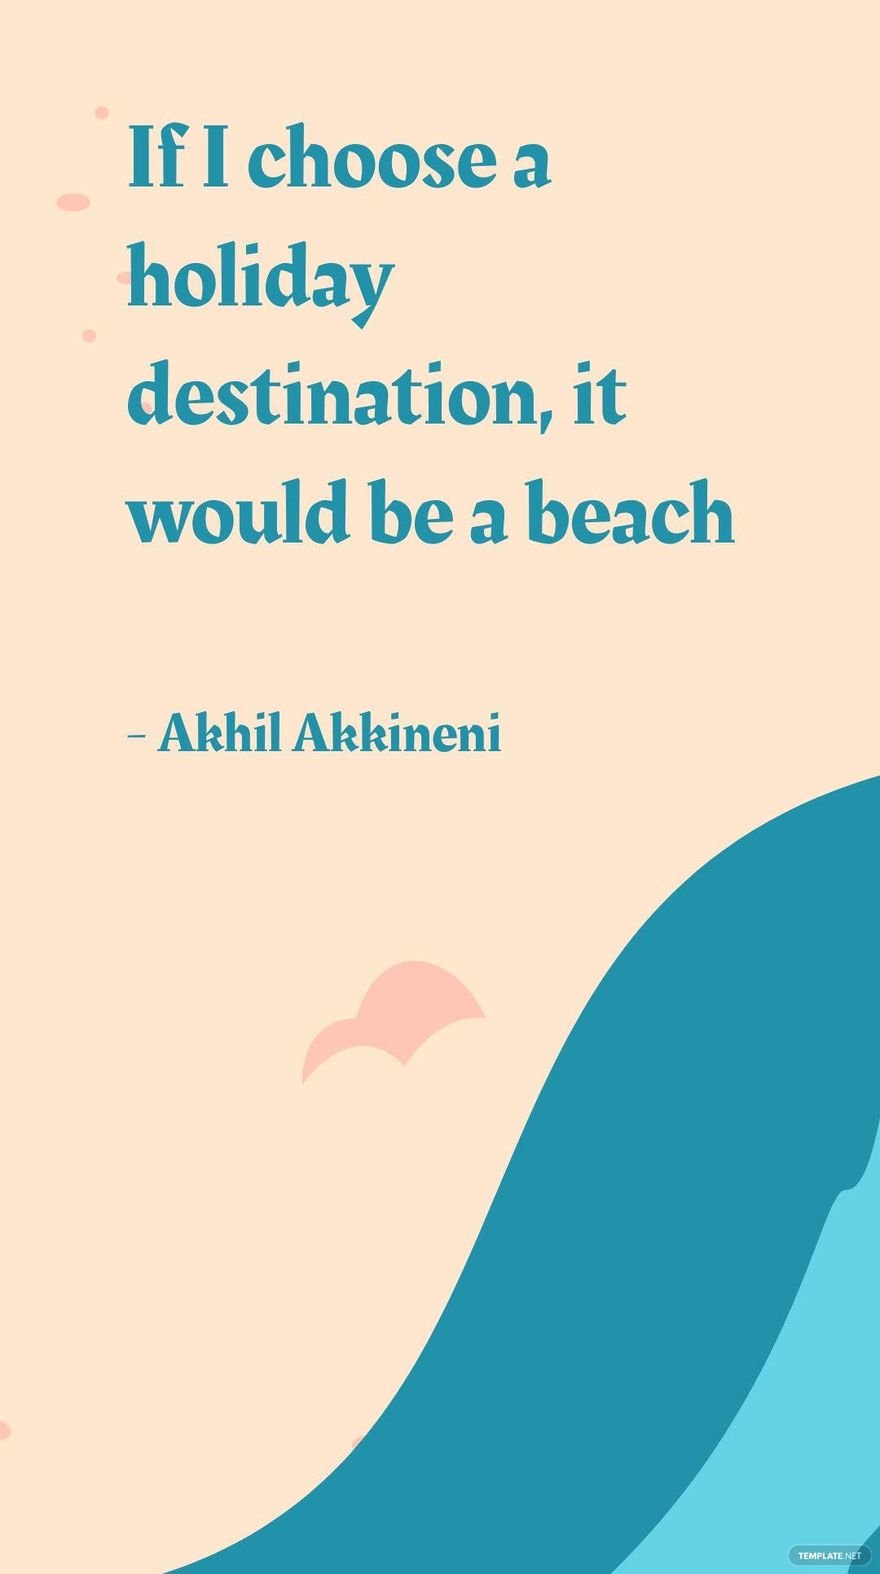 Akhil Akkineni - If I choose a holiday destination, it would be a beach in JPG